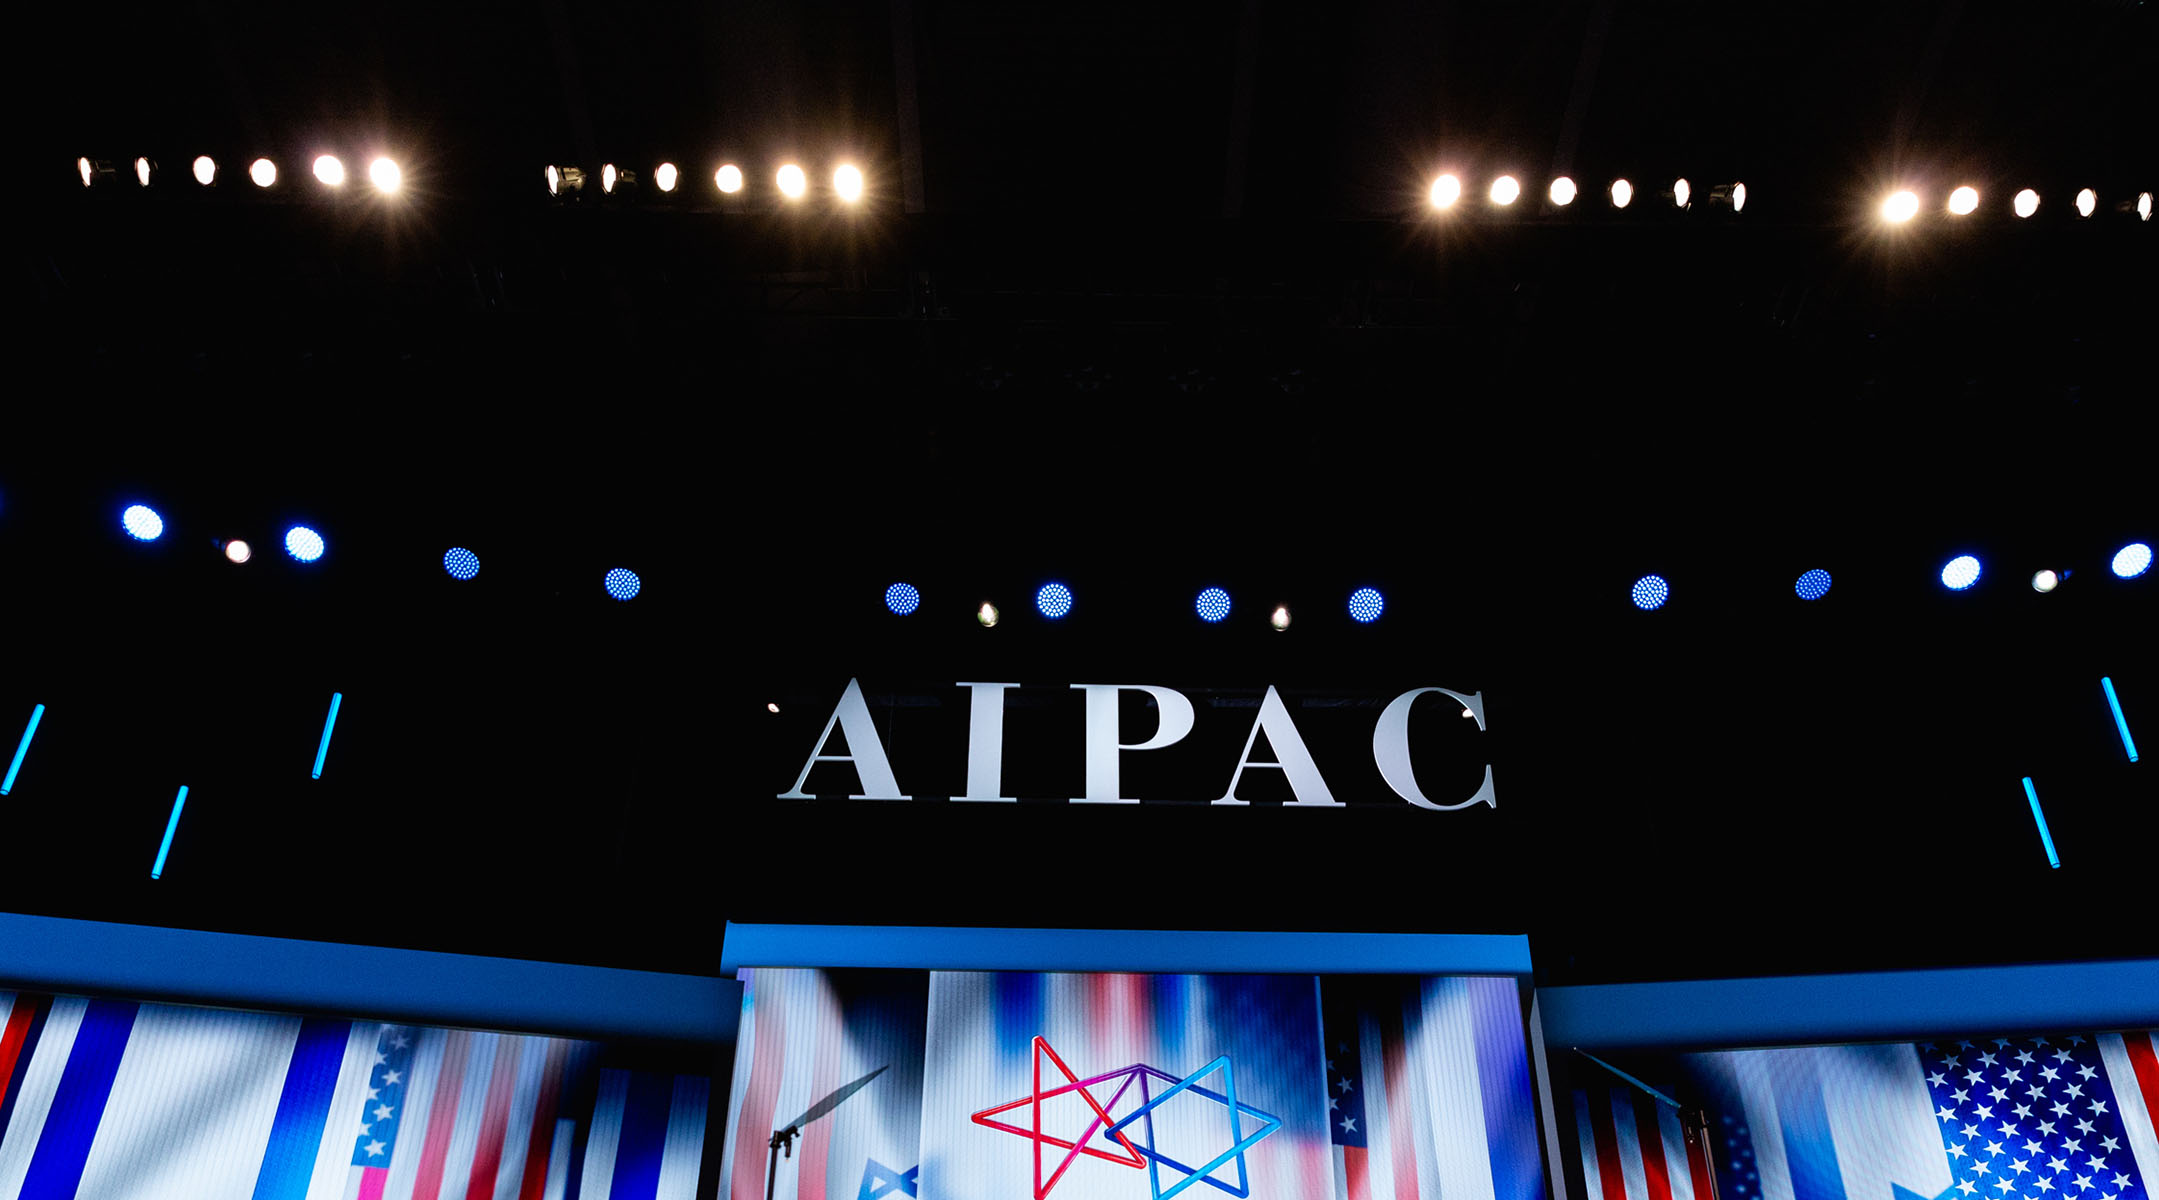 A view of the stage at the 2019 AIPAC conference in Washington, D.C. 